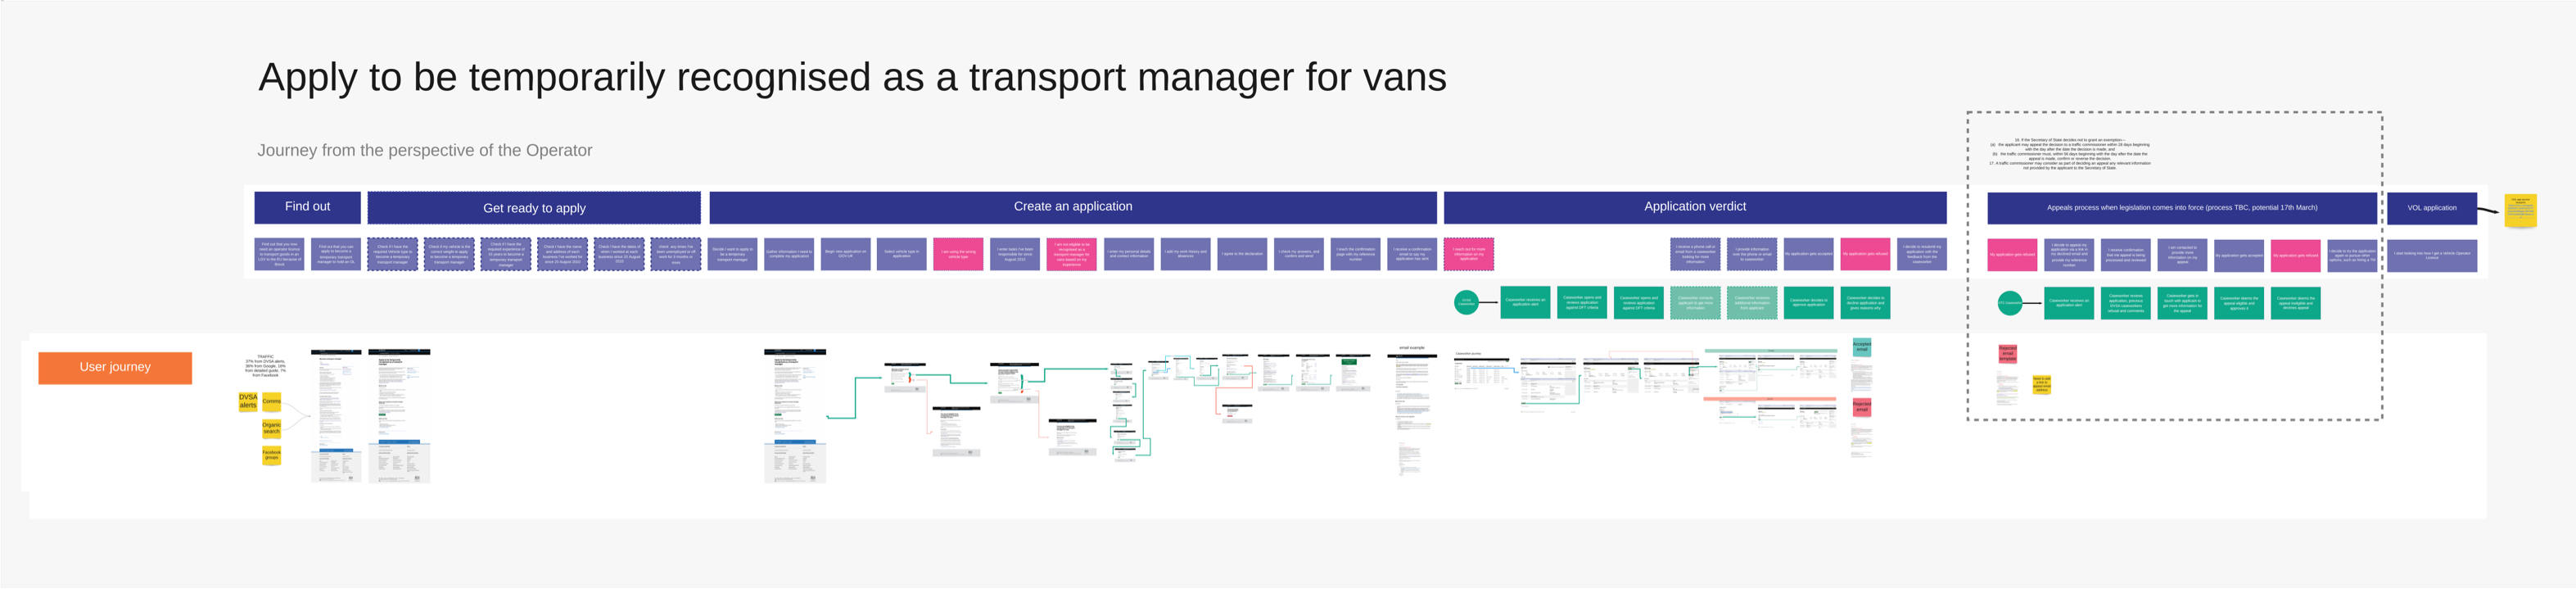 a picture of the full temporary transport manager service blueprint.